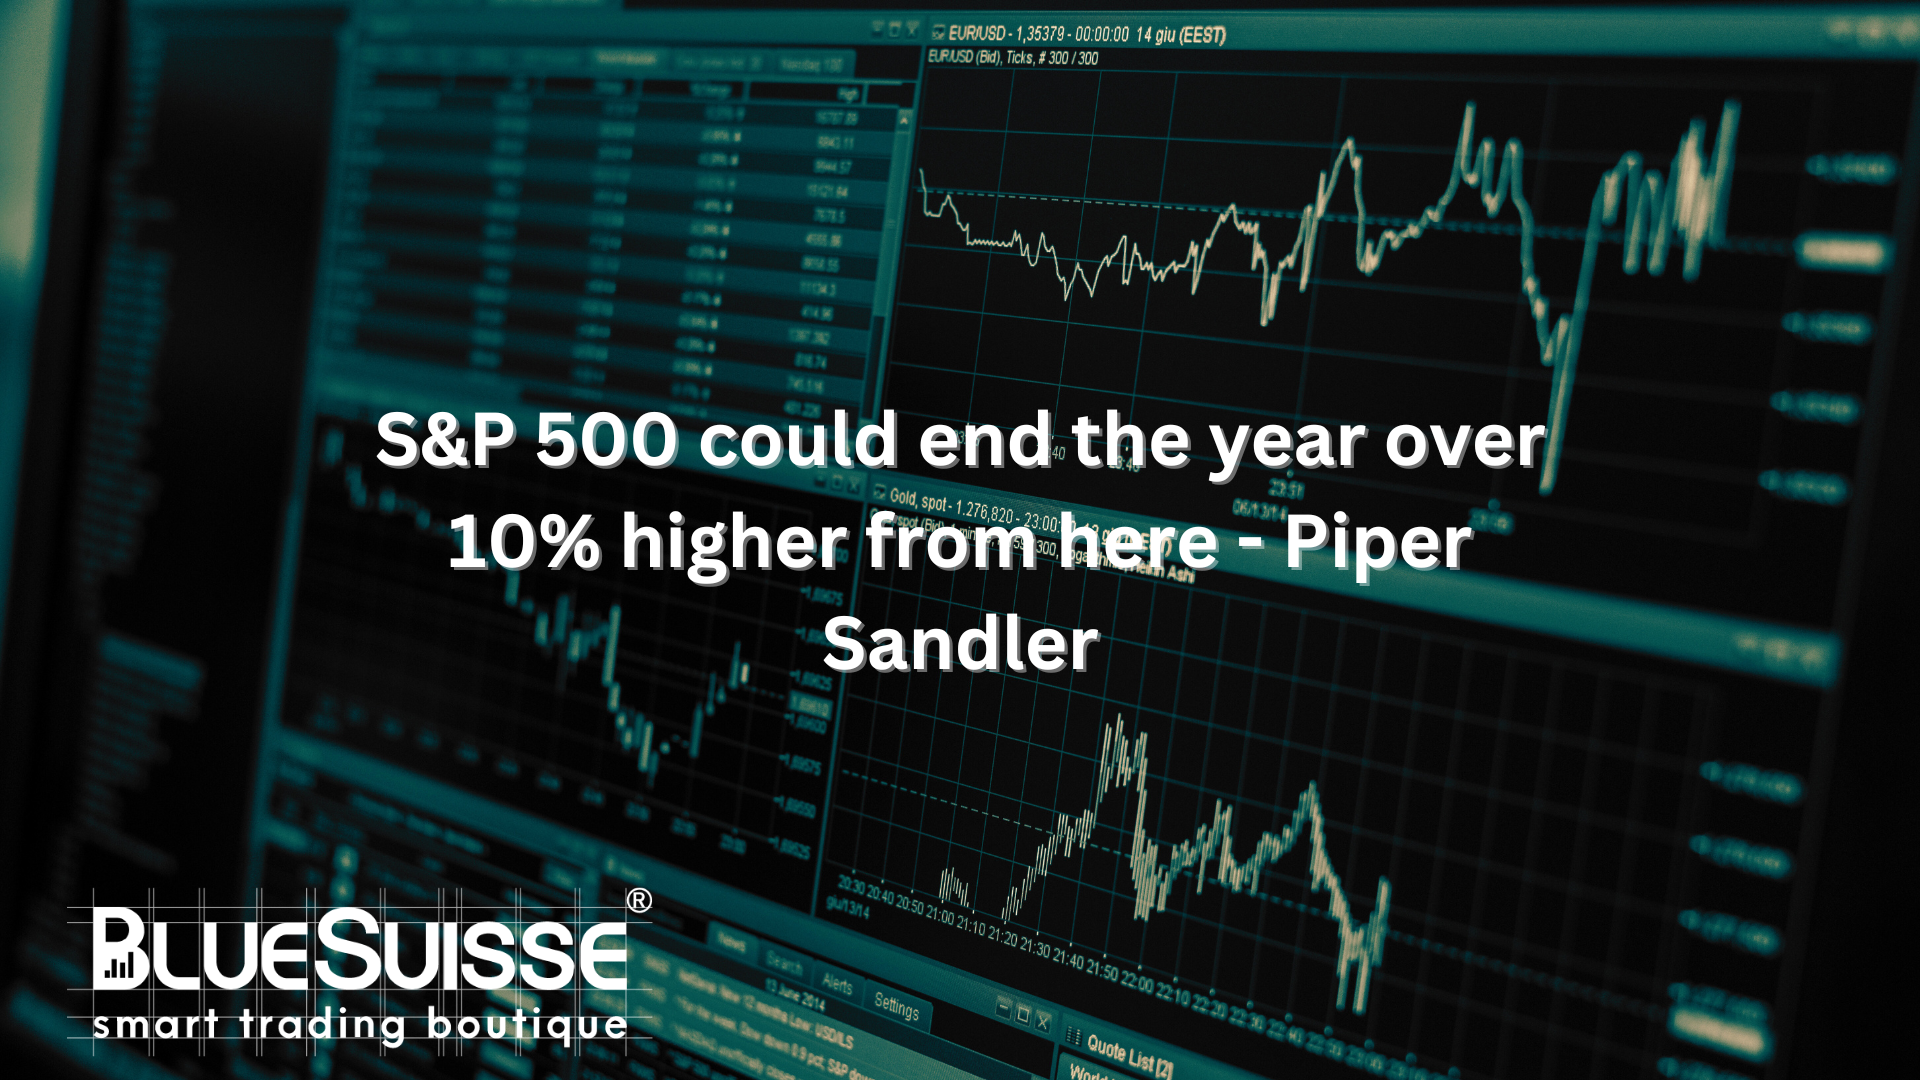 S&P 500 could end the year over 10% higher from here – Piper Sandler